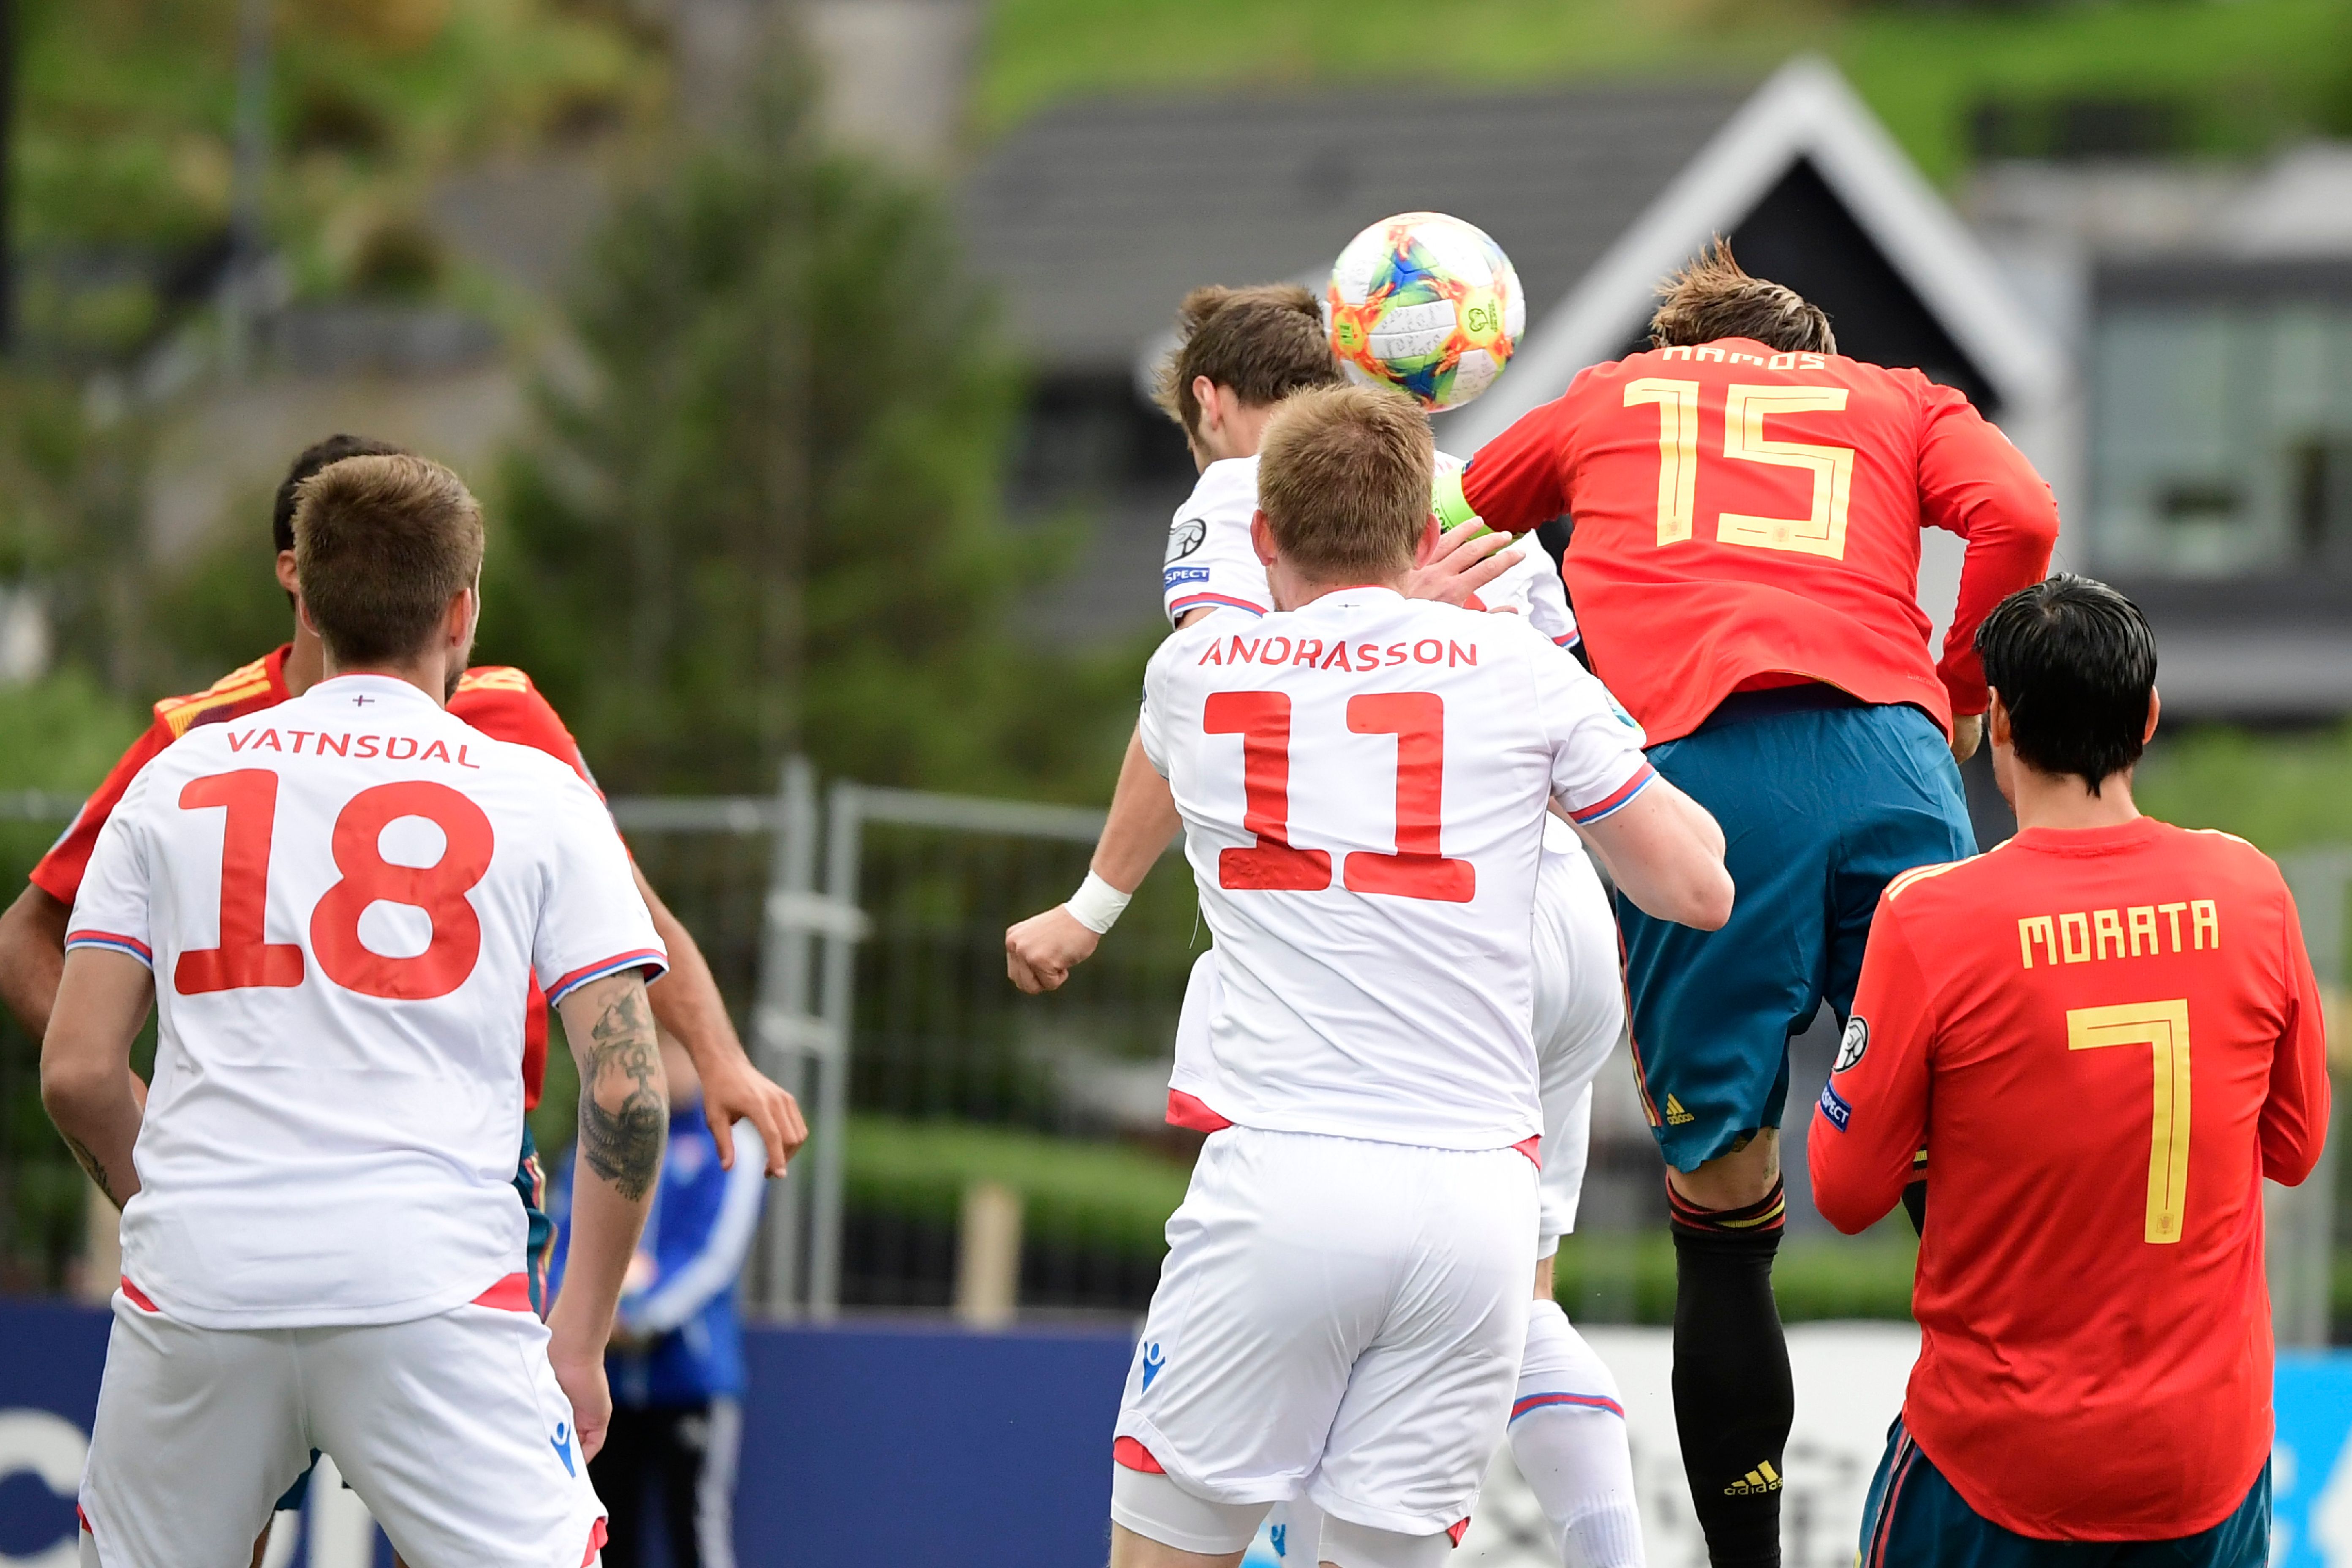 Spain´s defender Sergio Ramos (2R) scores a goal during the UEFA Euro 2020 group F qualifying football match between Faroe Islands and Spain at the Trosvollur stadium in Torshavn on June 7, 2019. (Photo by JAVIER SORIANO / AFP)        (Photo credit should read JAVIER SORIANO/AFP/Getty Images)